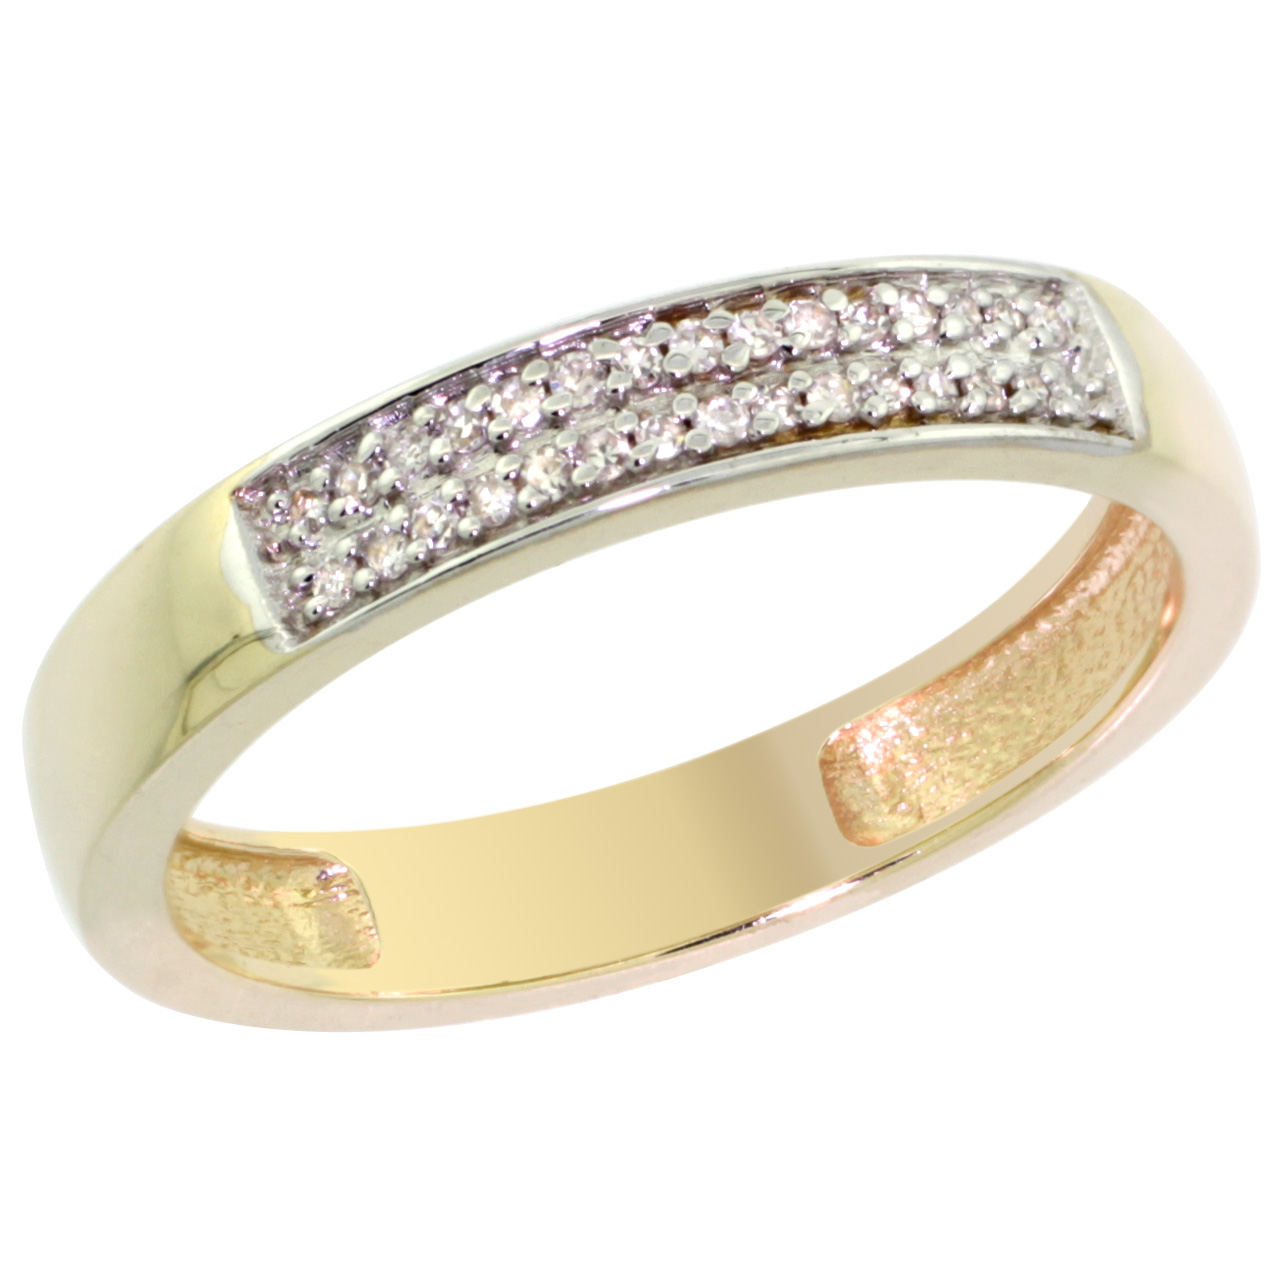 10K Yellow Gold Wedding Band Ring 2-Row Diamond Accent 5/32 inch wide, sizes 5 - 10